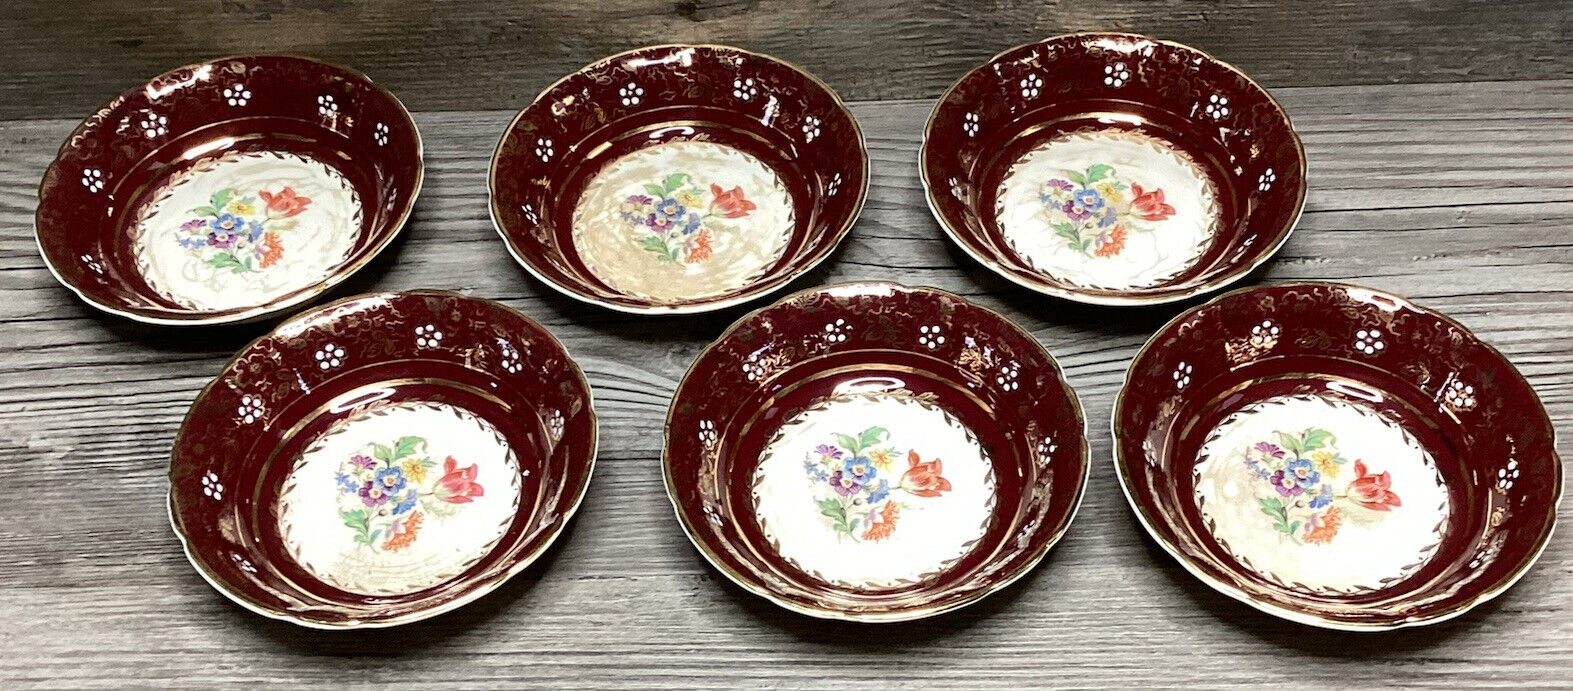 1930’s Crown Pottery Tams Lot 6x Maroon w Gold Leaf Overlay Floral Dessert Bowls